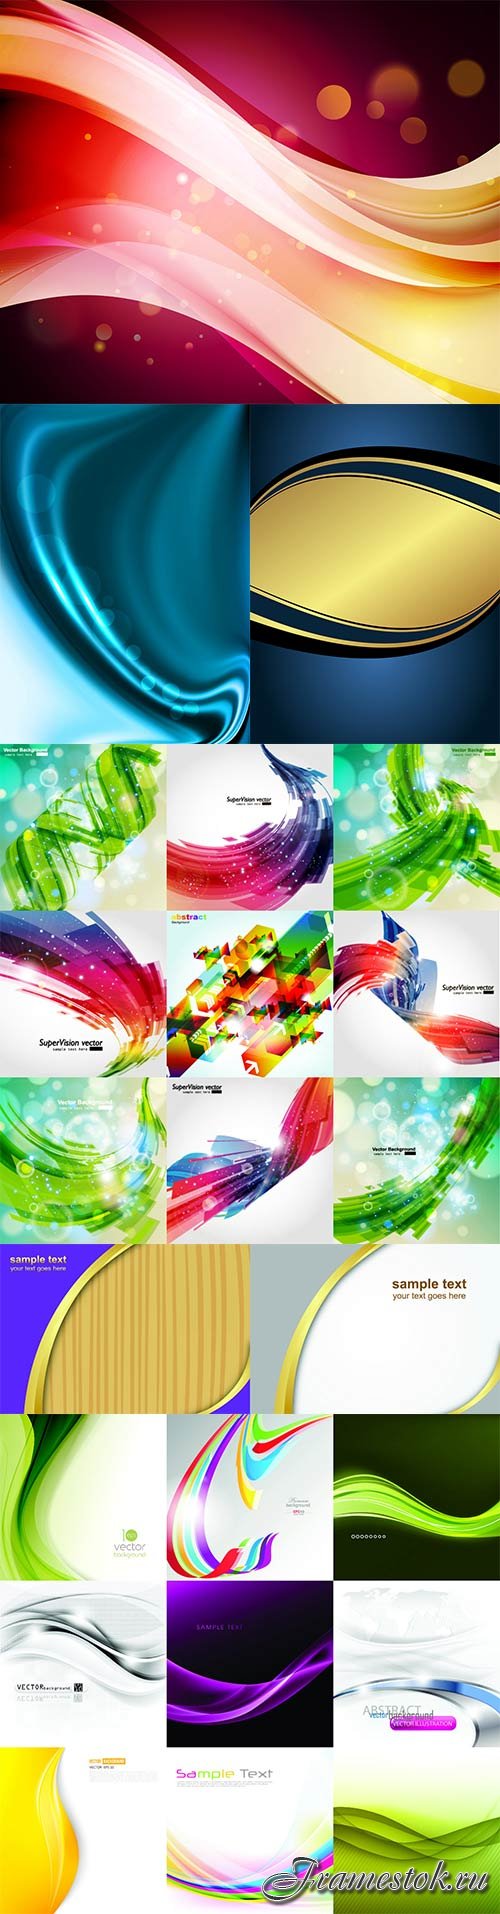 Bright colorful abstract backgrounds vector - 86